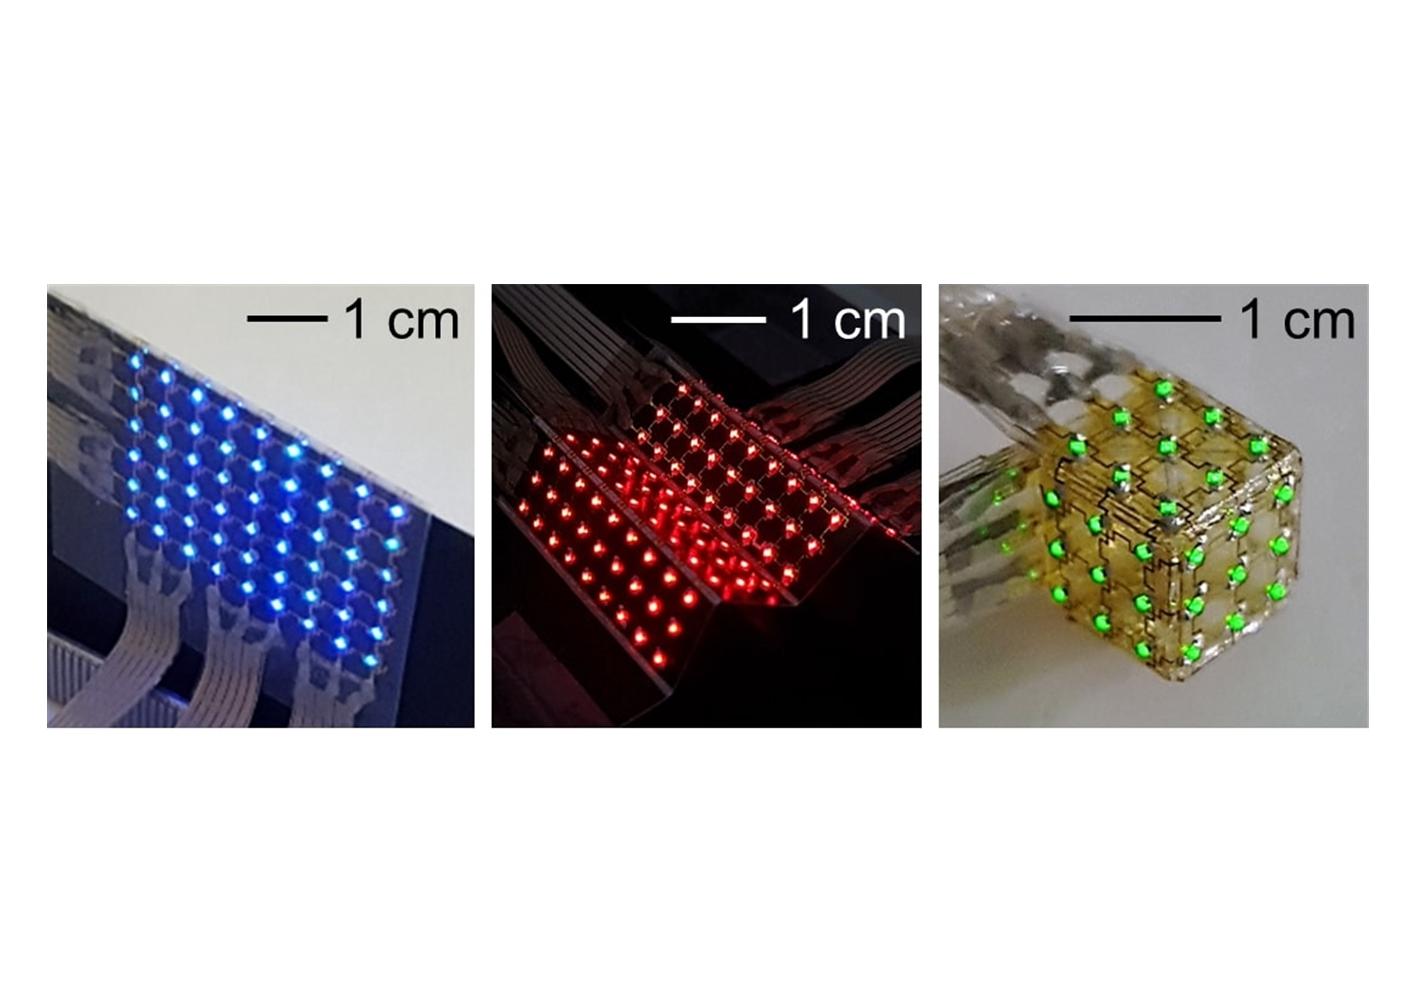 Professor Heung Cho Ko's research team develops a 3D structural display using origami 이미지